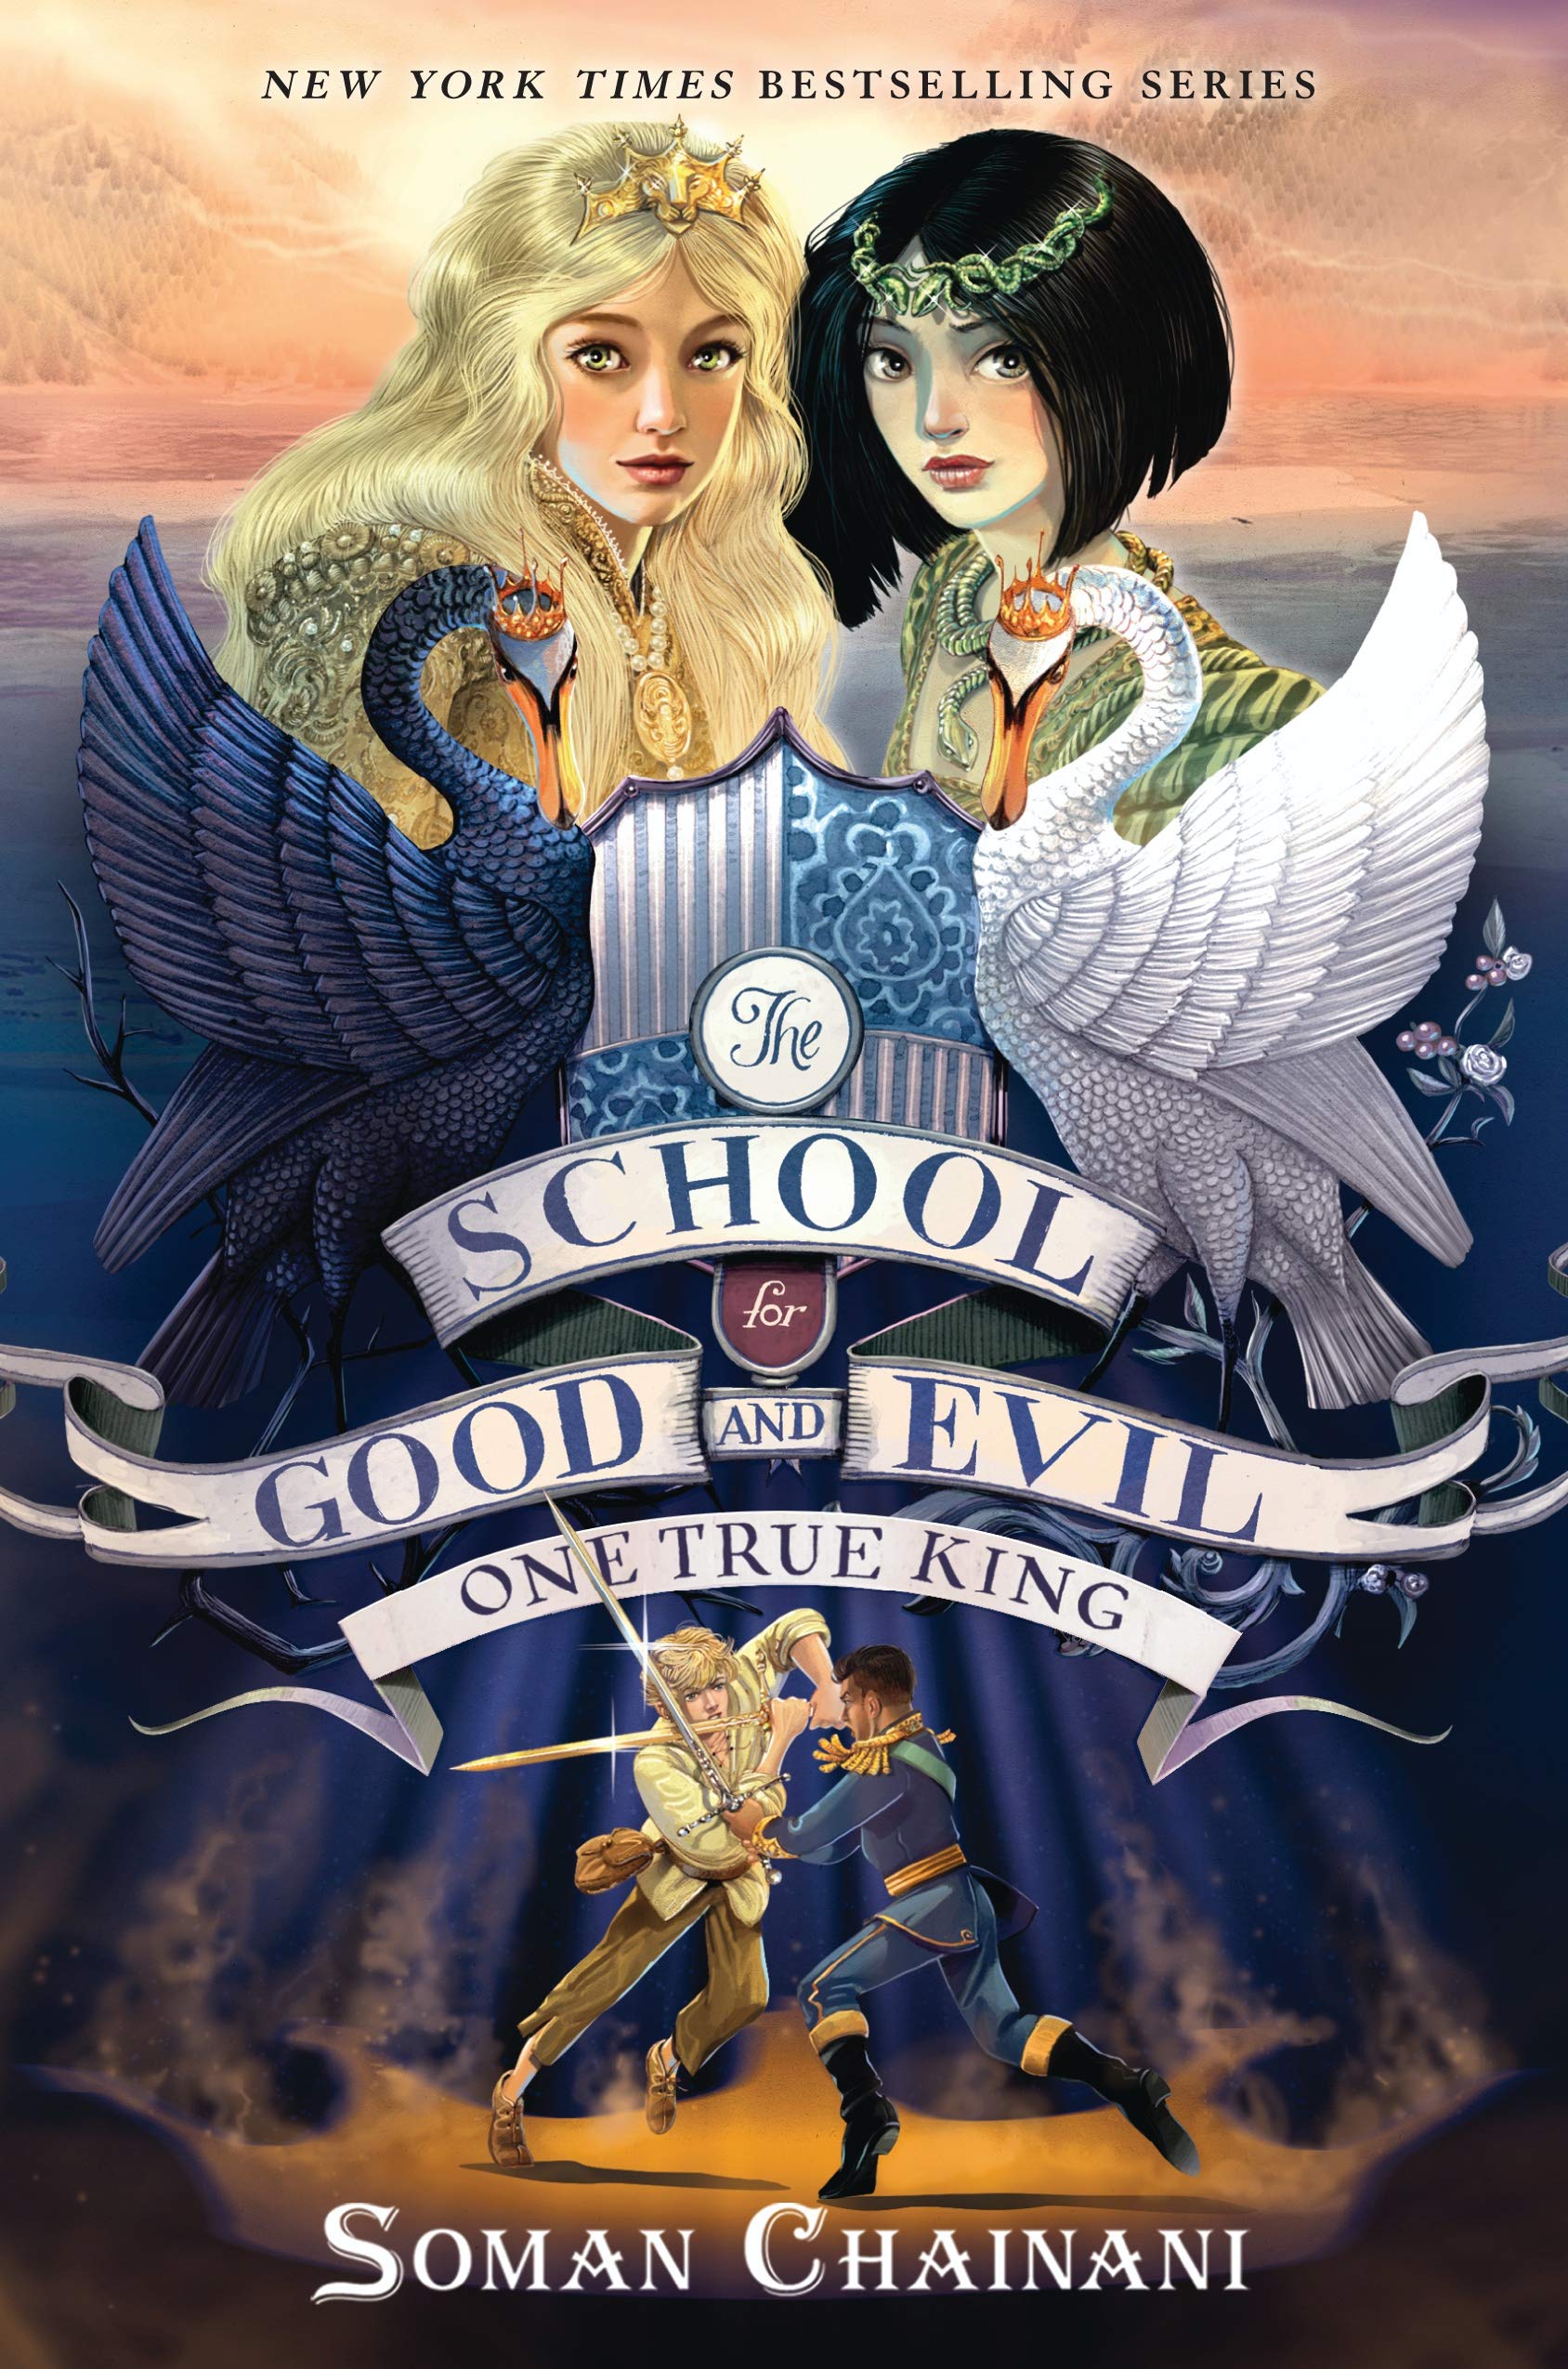 The School for Good and Evil #6: One True King, The (international edition) (Paperback)